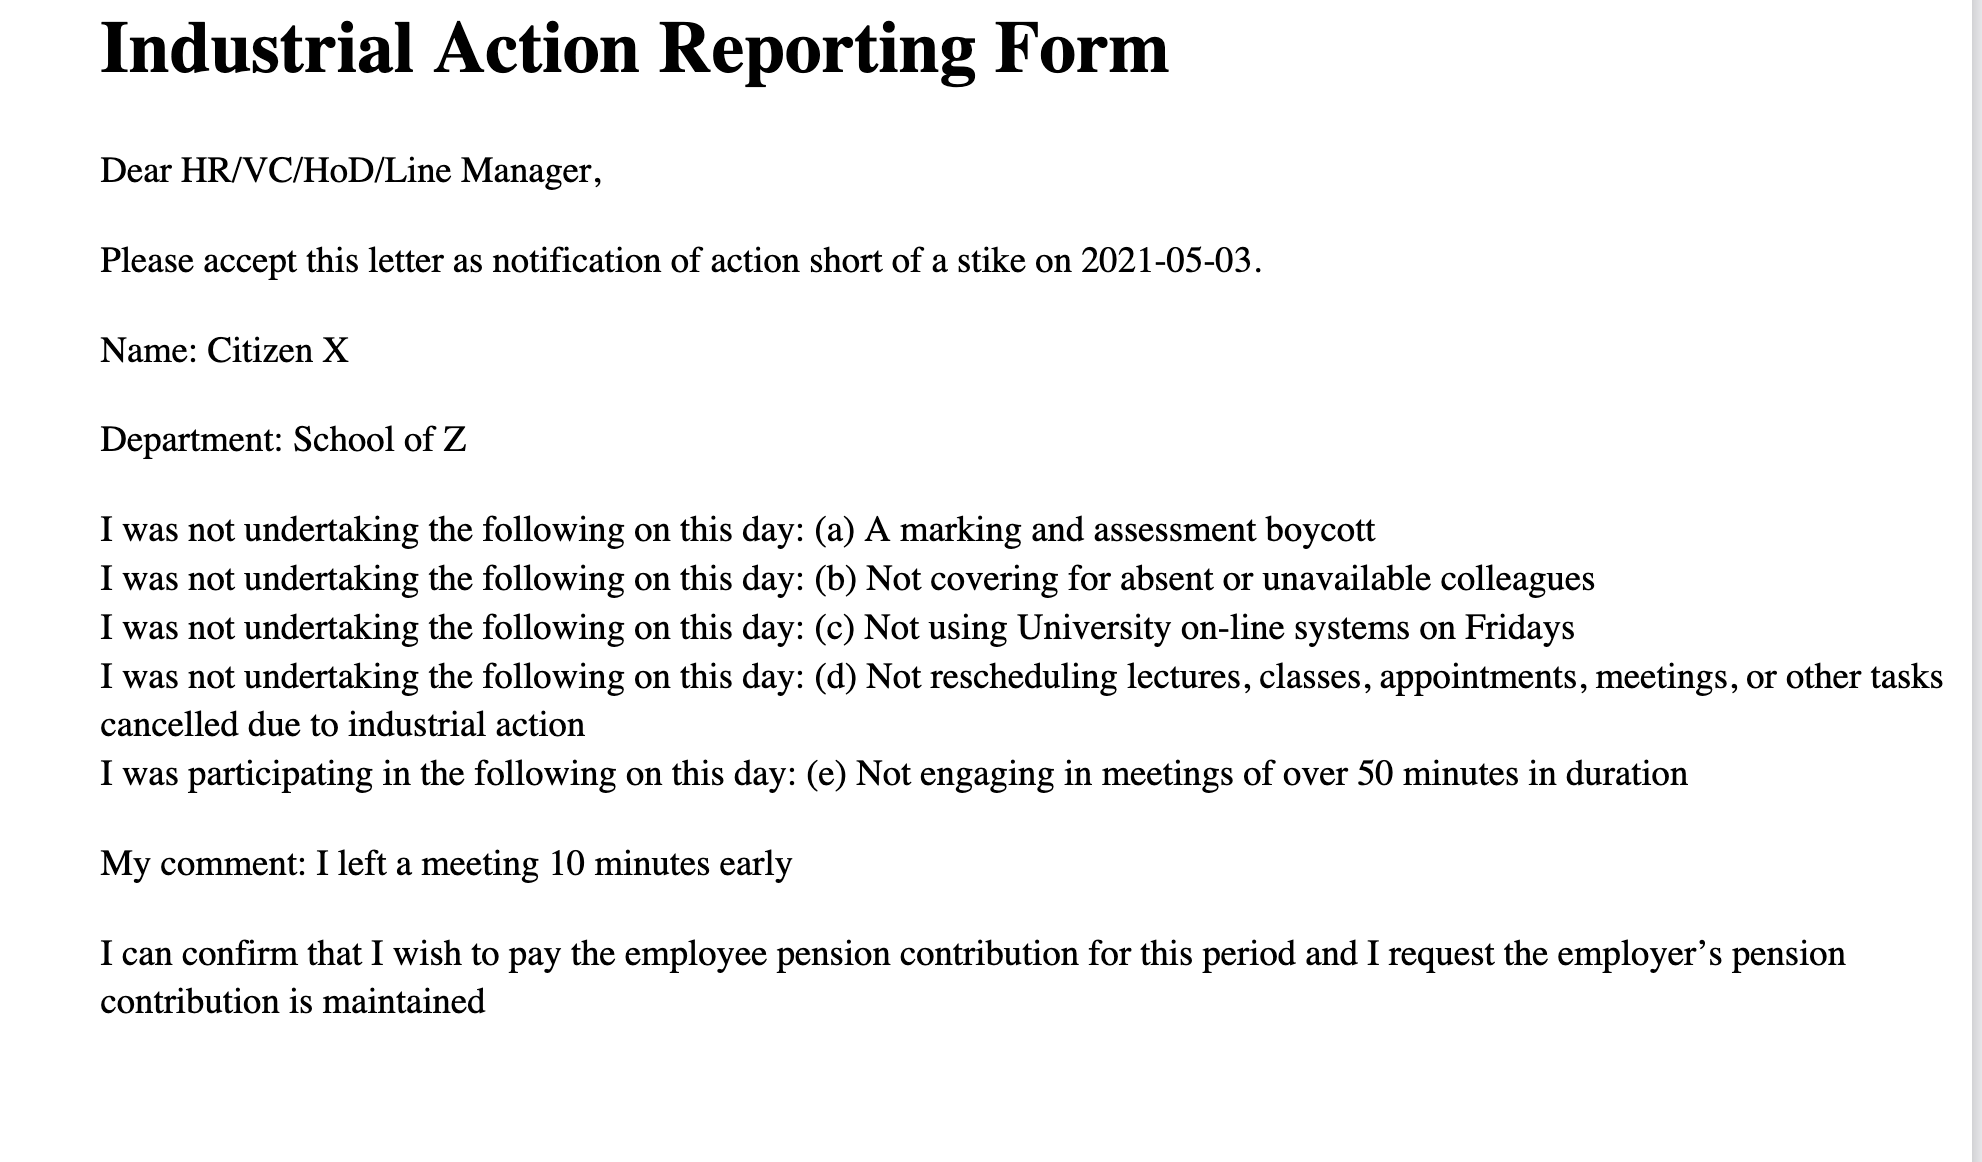 Industrial action reporting form